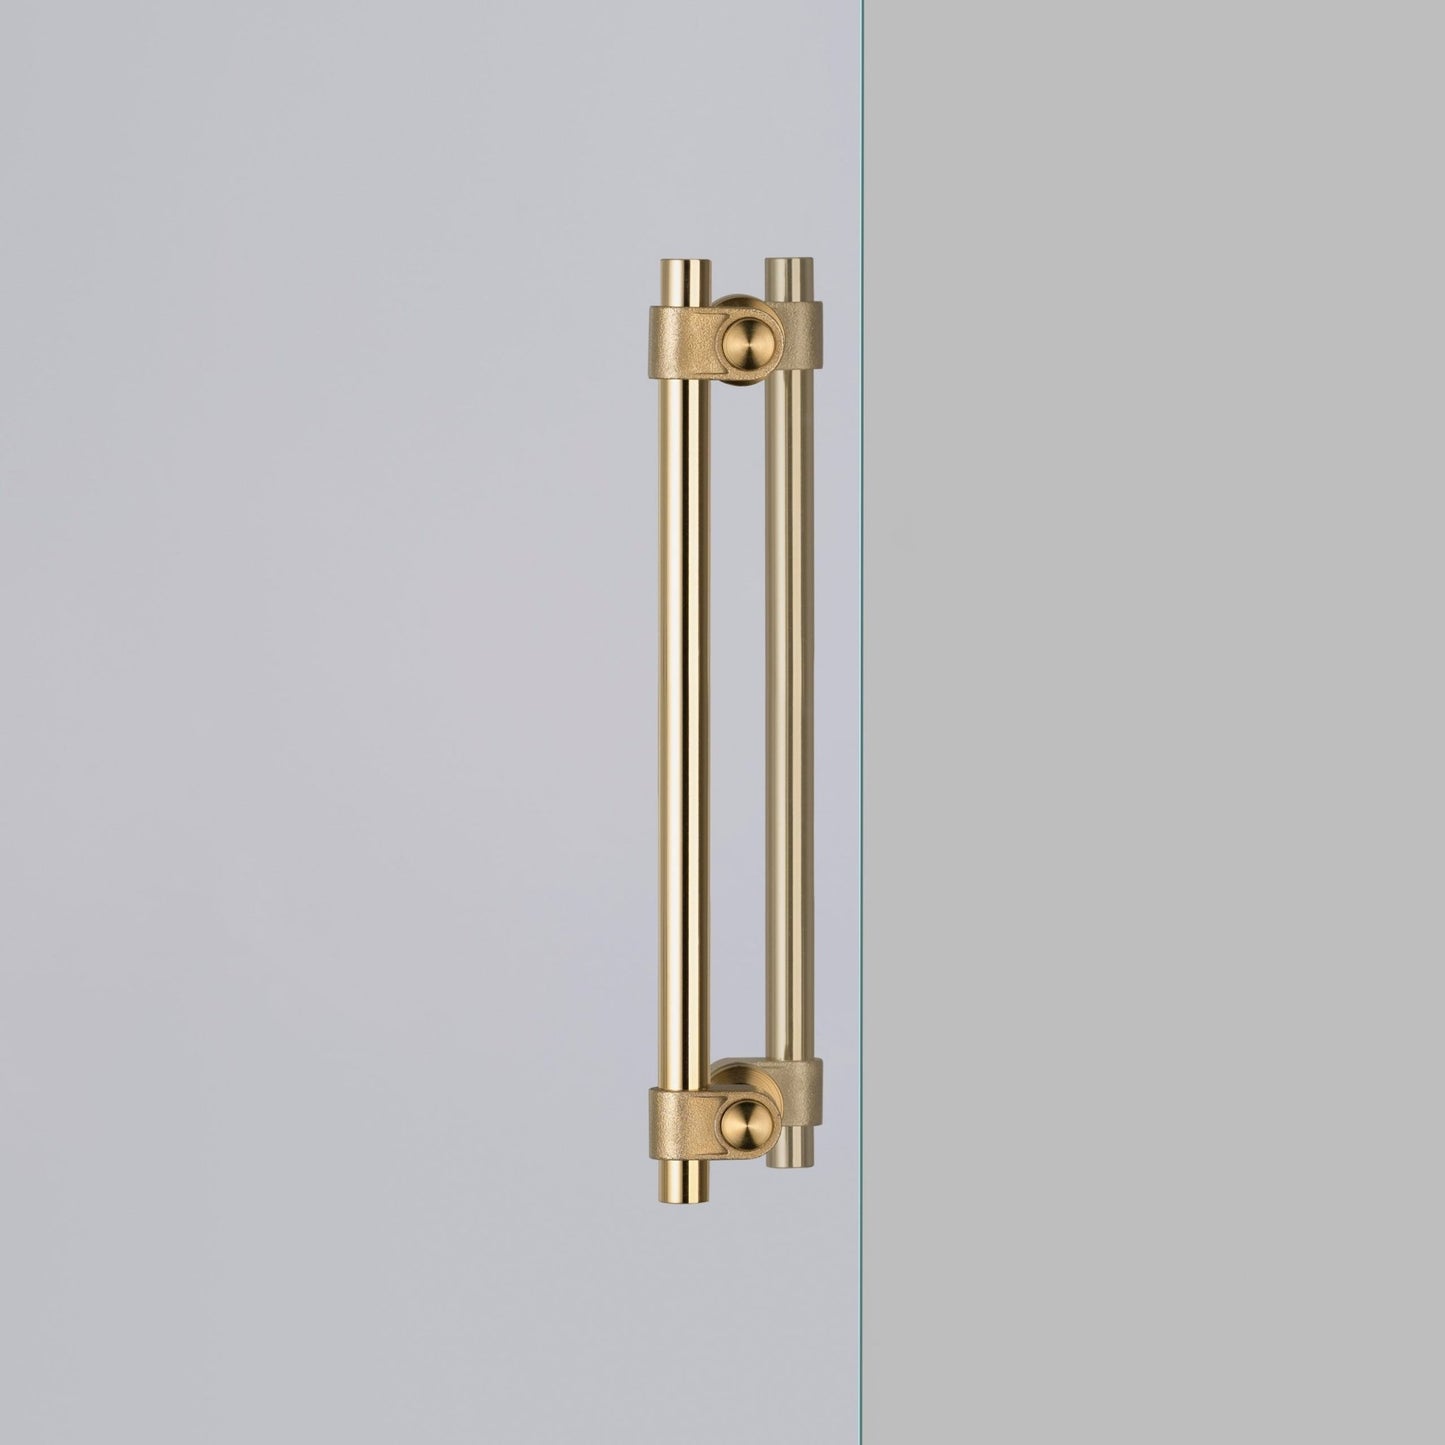 Solid Double-Sided Pull Bar Stainless Gold, Brass - |VESIMI Design| Luxury and Rustic bathrooms online